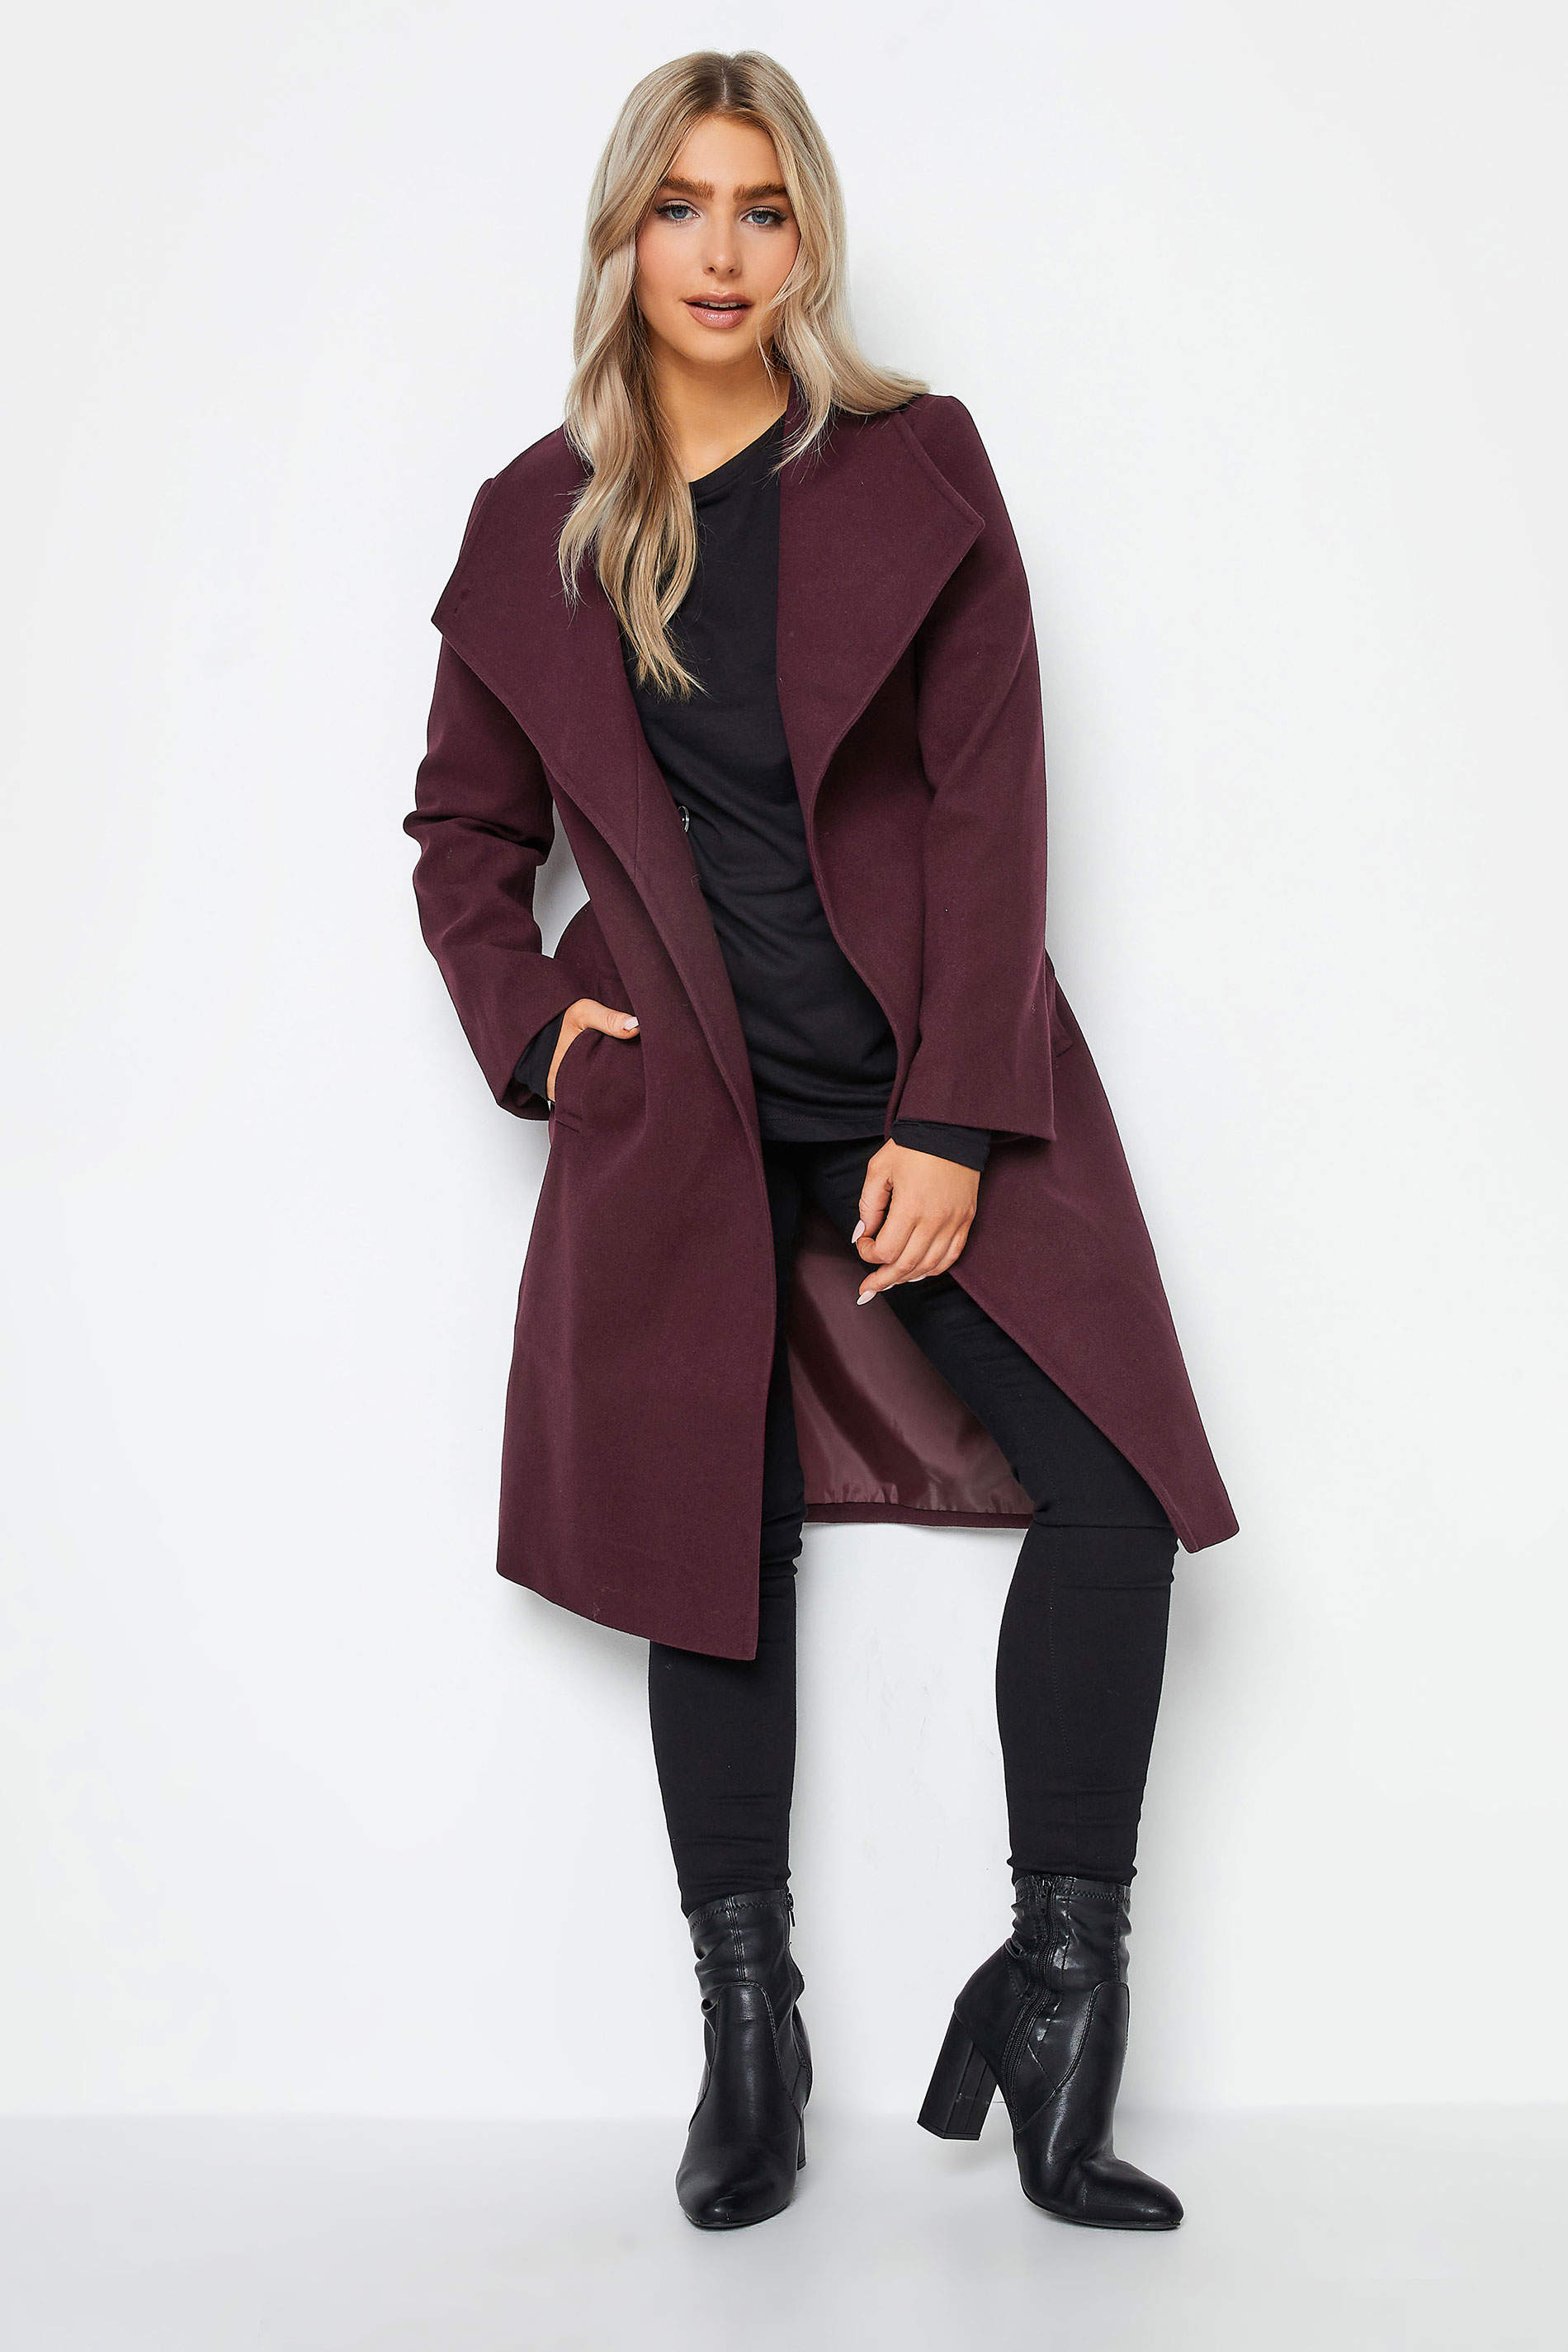 M&Co Wine Red Belted Formal Coat | M&Co 2